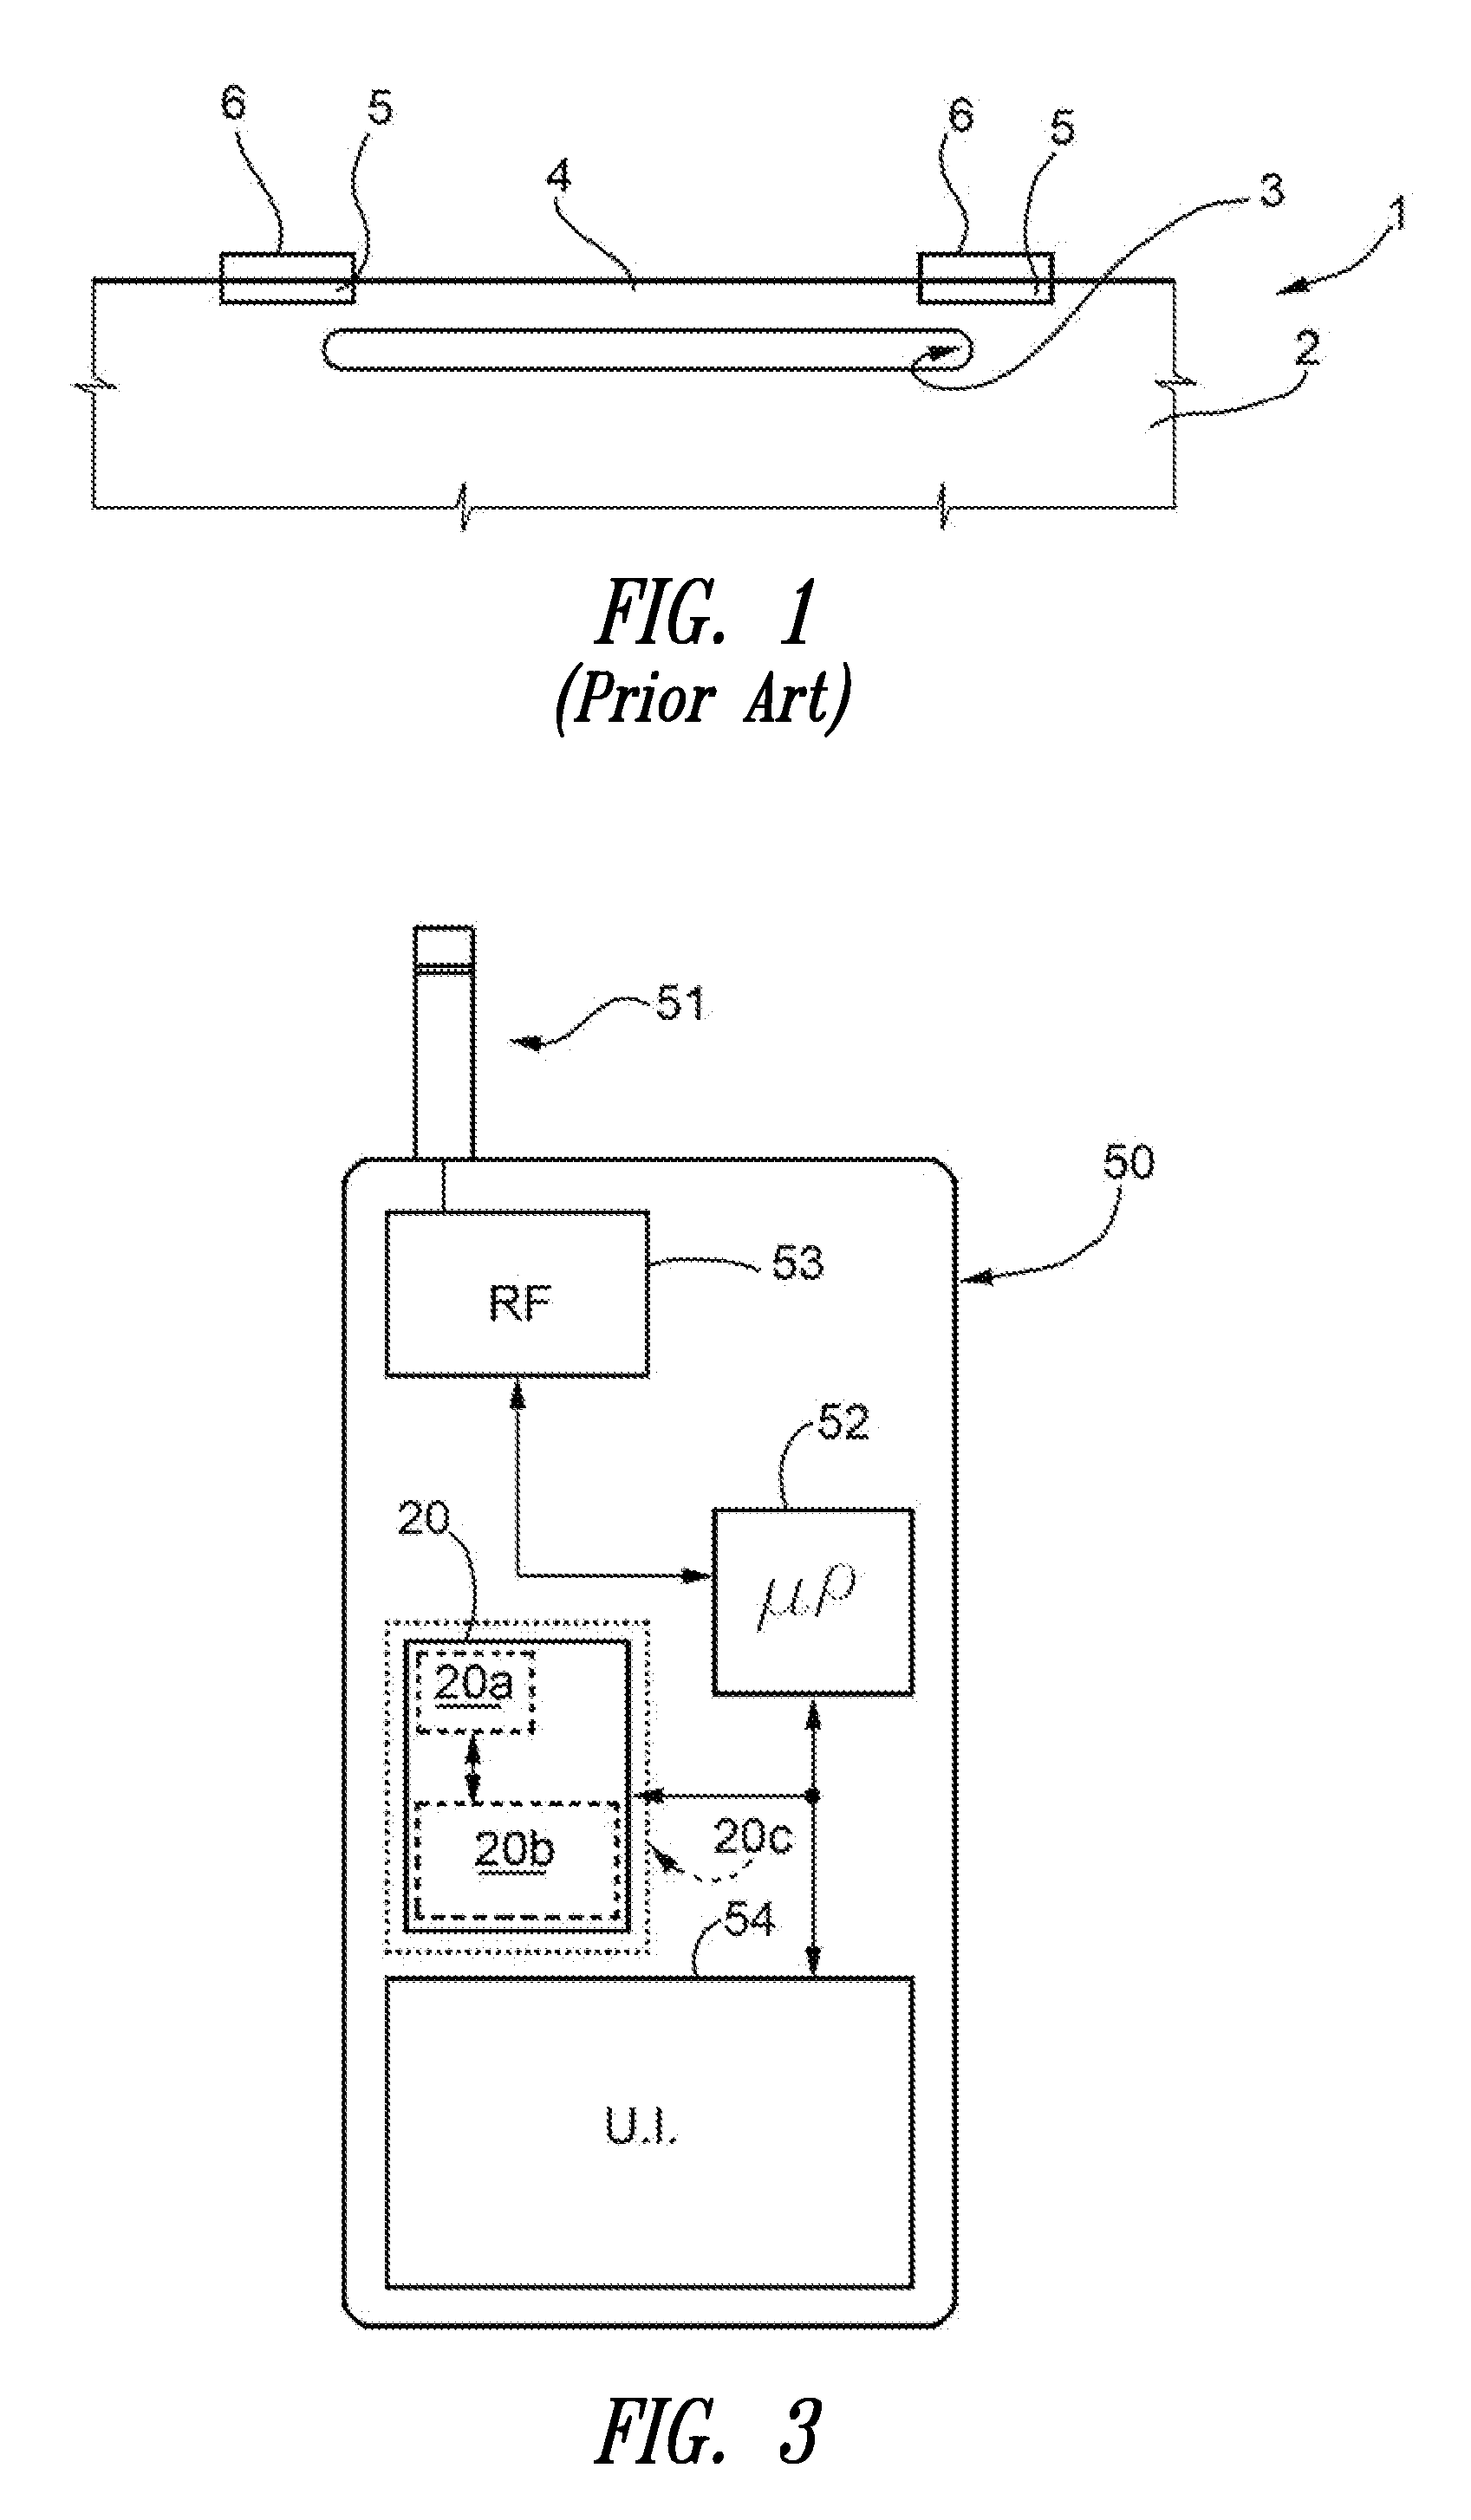 Barometric-pressure-sensor device with altimeter function and altimeter-setting function